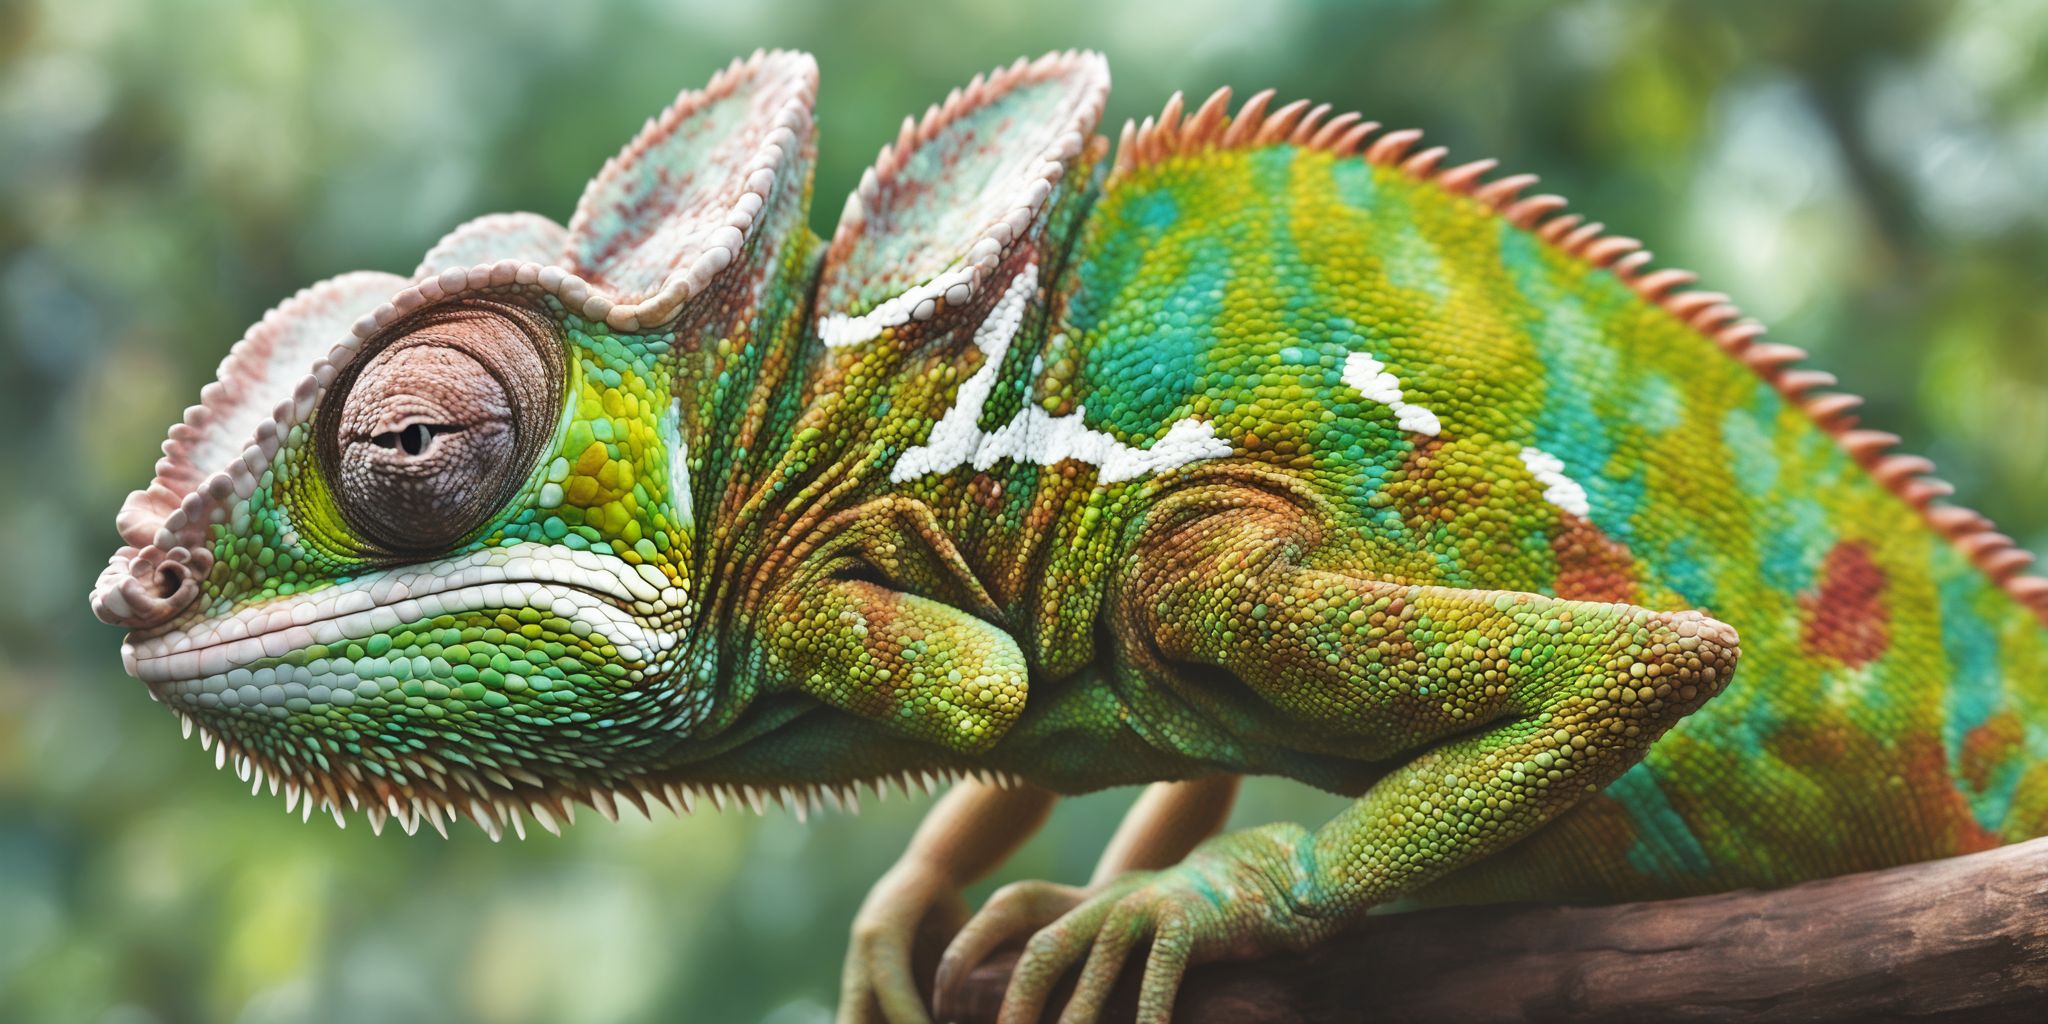 Chameleon  in realistic, photographic style